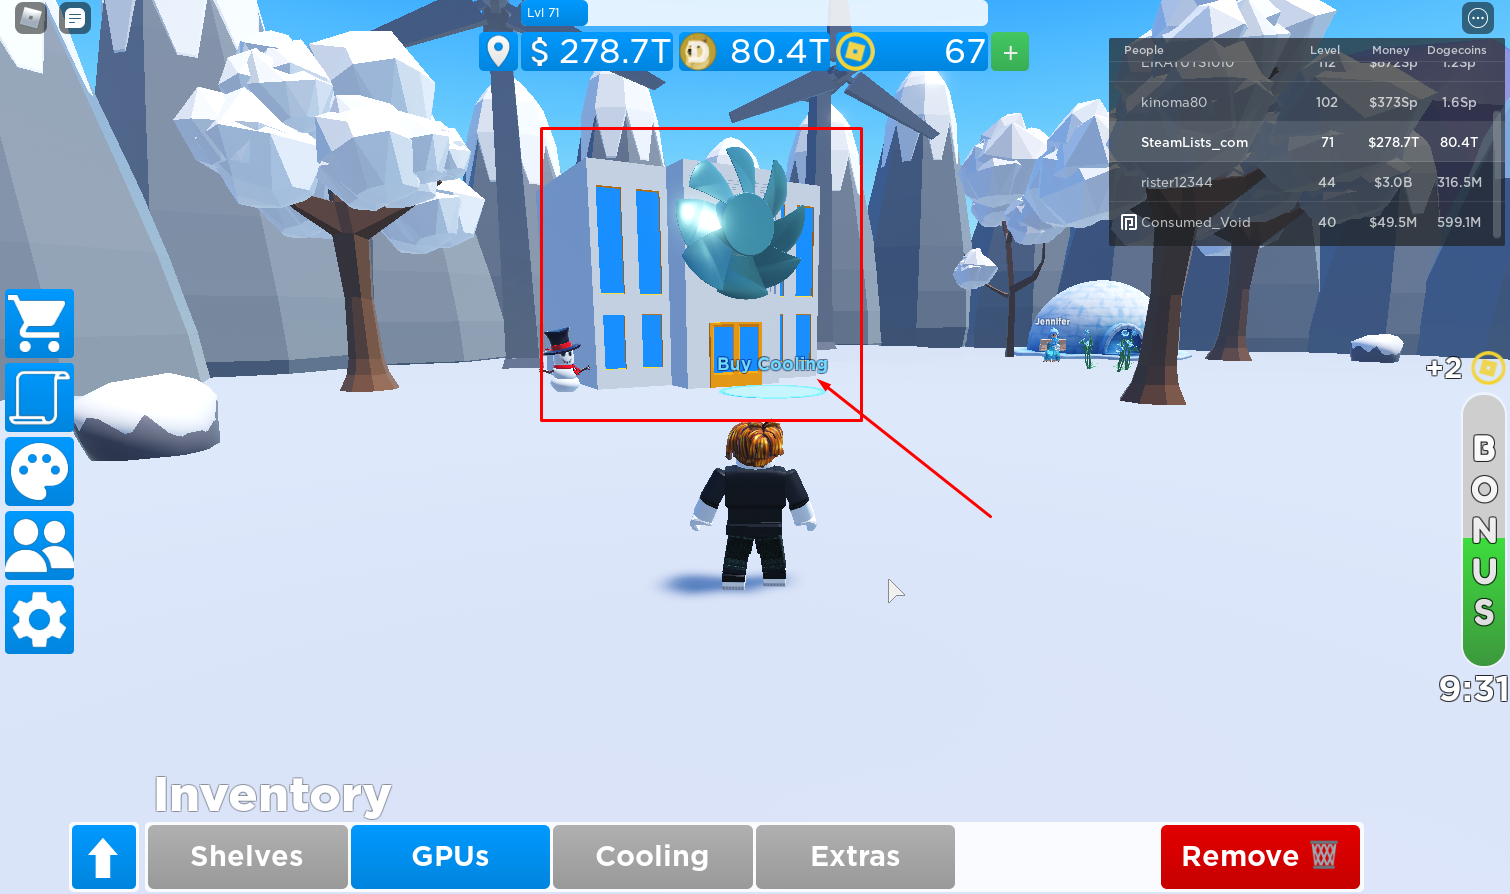 Roblox – Dogecoin Mining Tycoon where to get Fans? 2 - steamlists.com